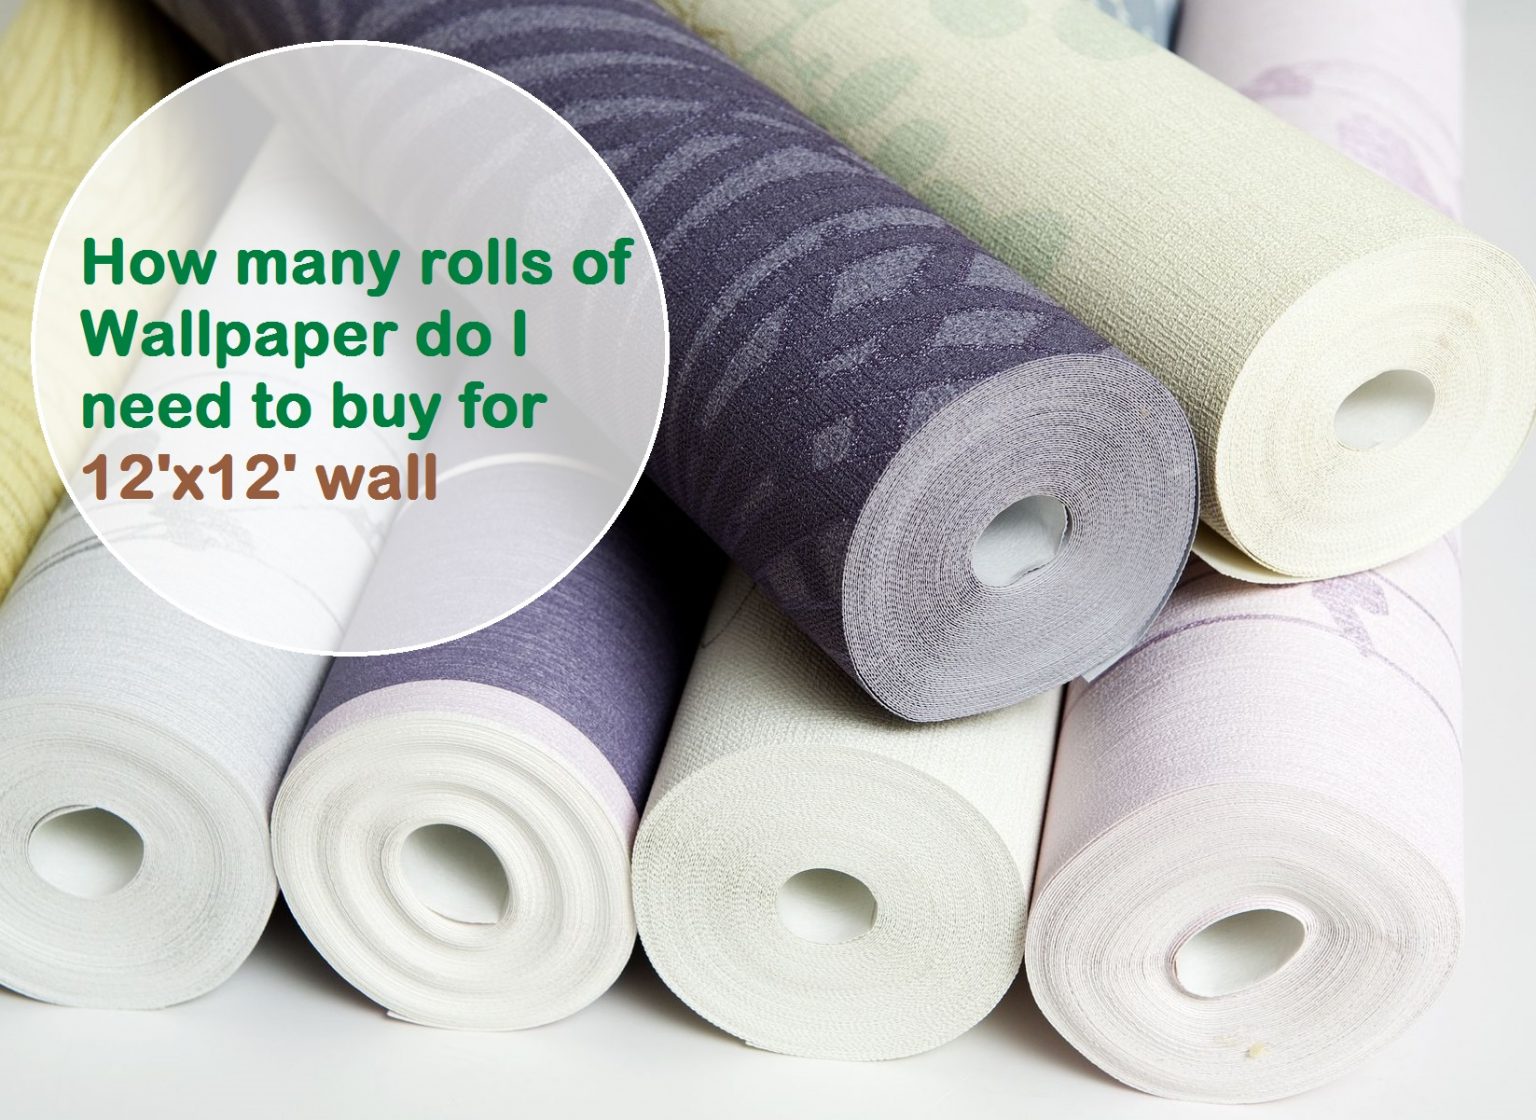 Wallpaper Roll Size And Price In India With Proper Guidelines For